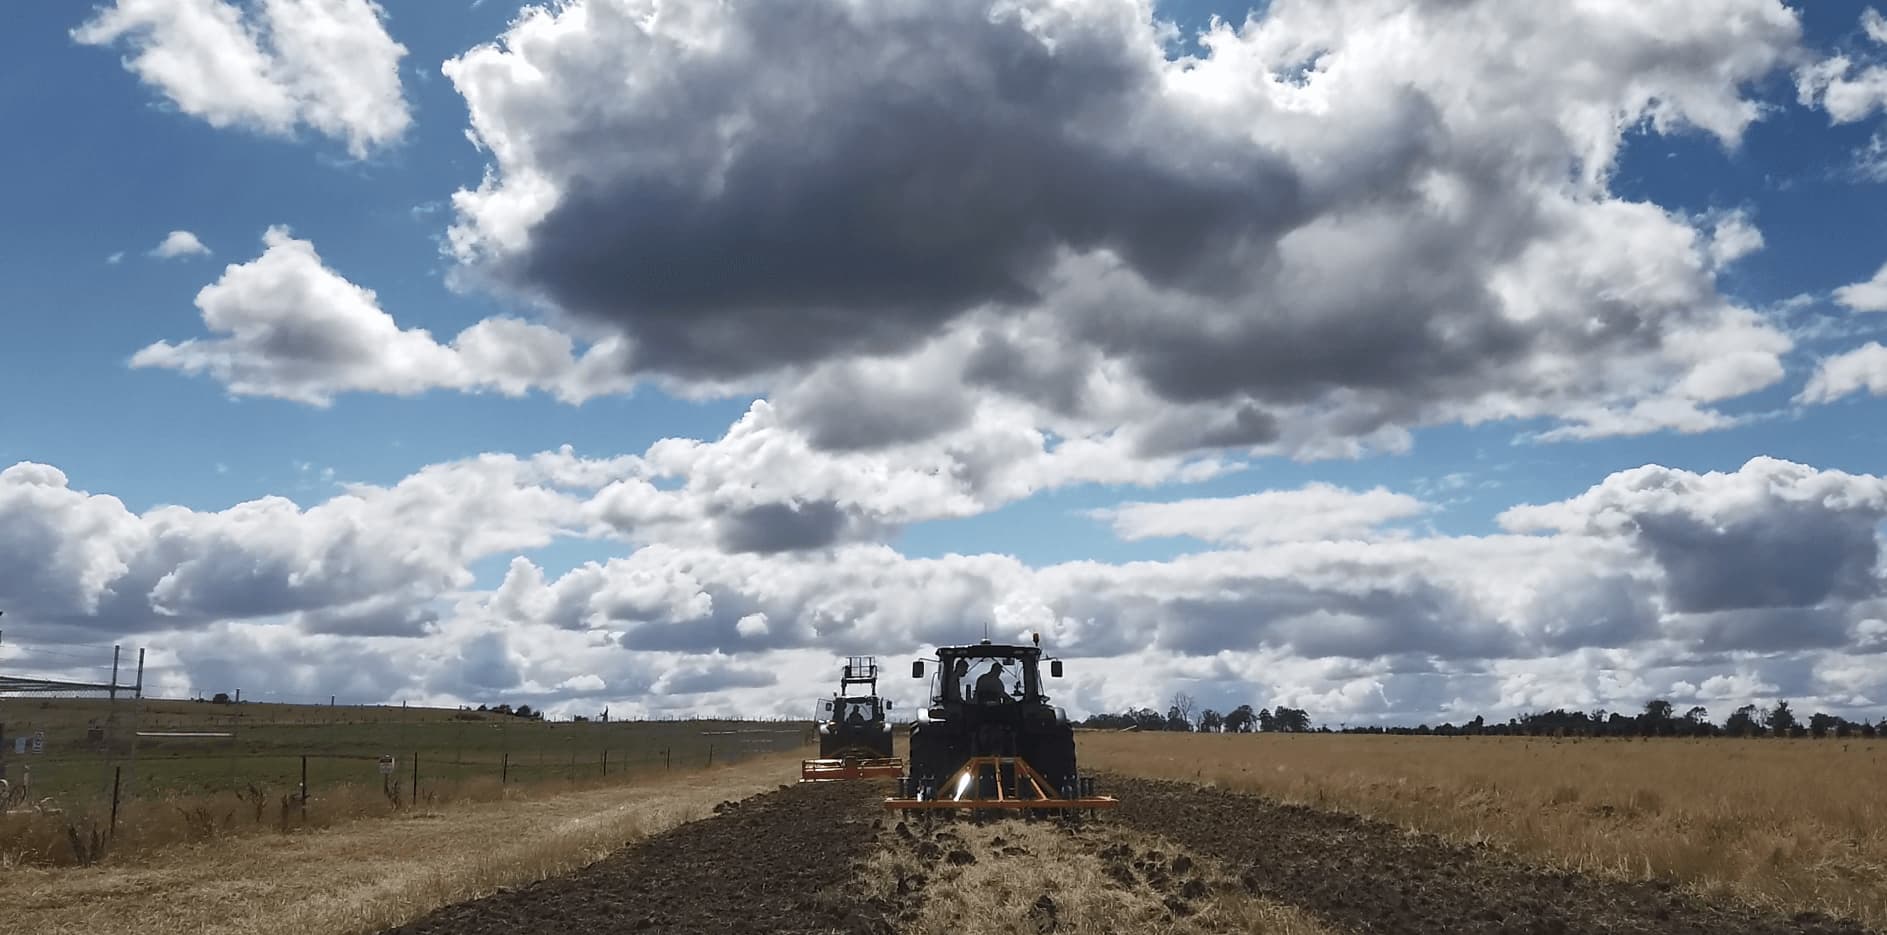 Delmade Subsoiler Deep Ripper behind a John Deere Tractor Working Image - Delmade Demo Day March 2020